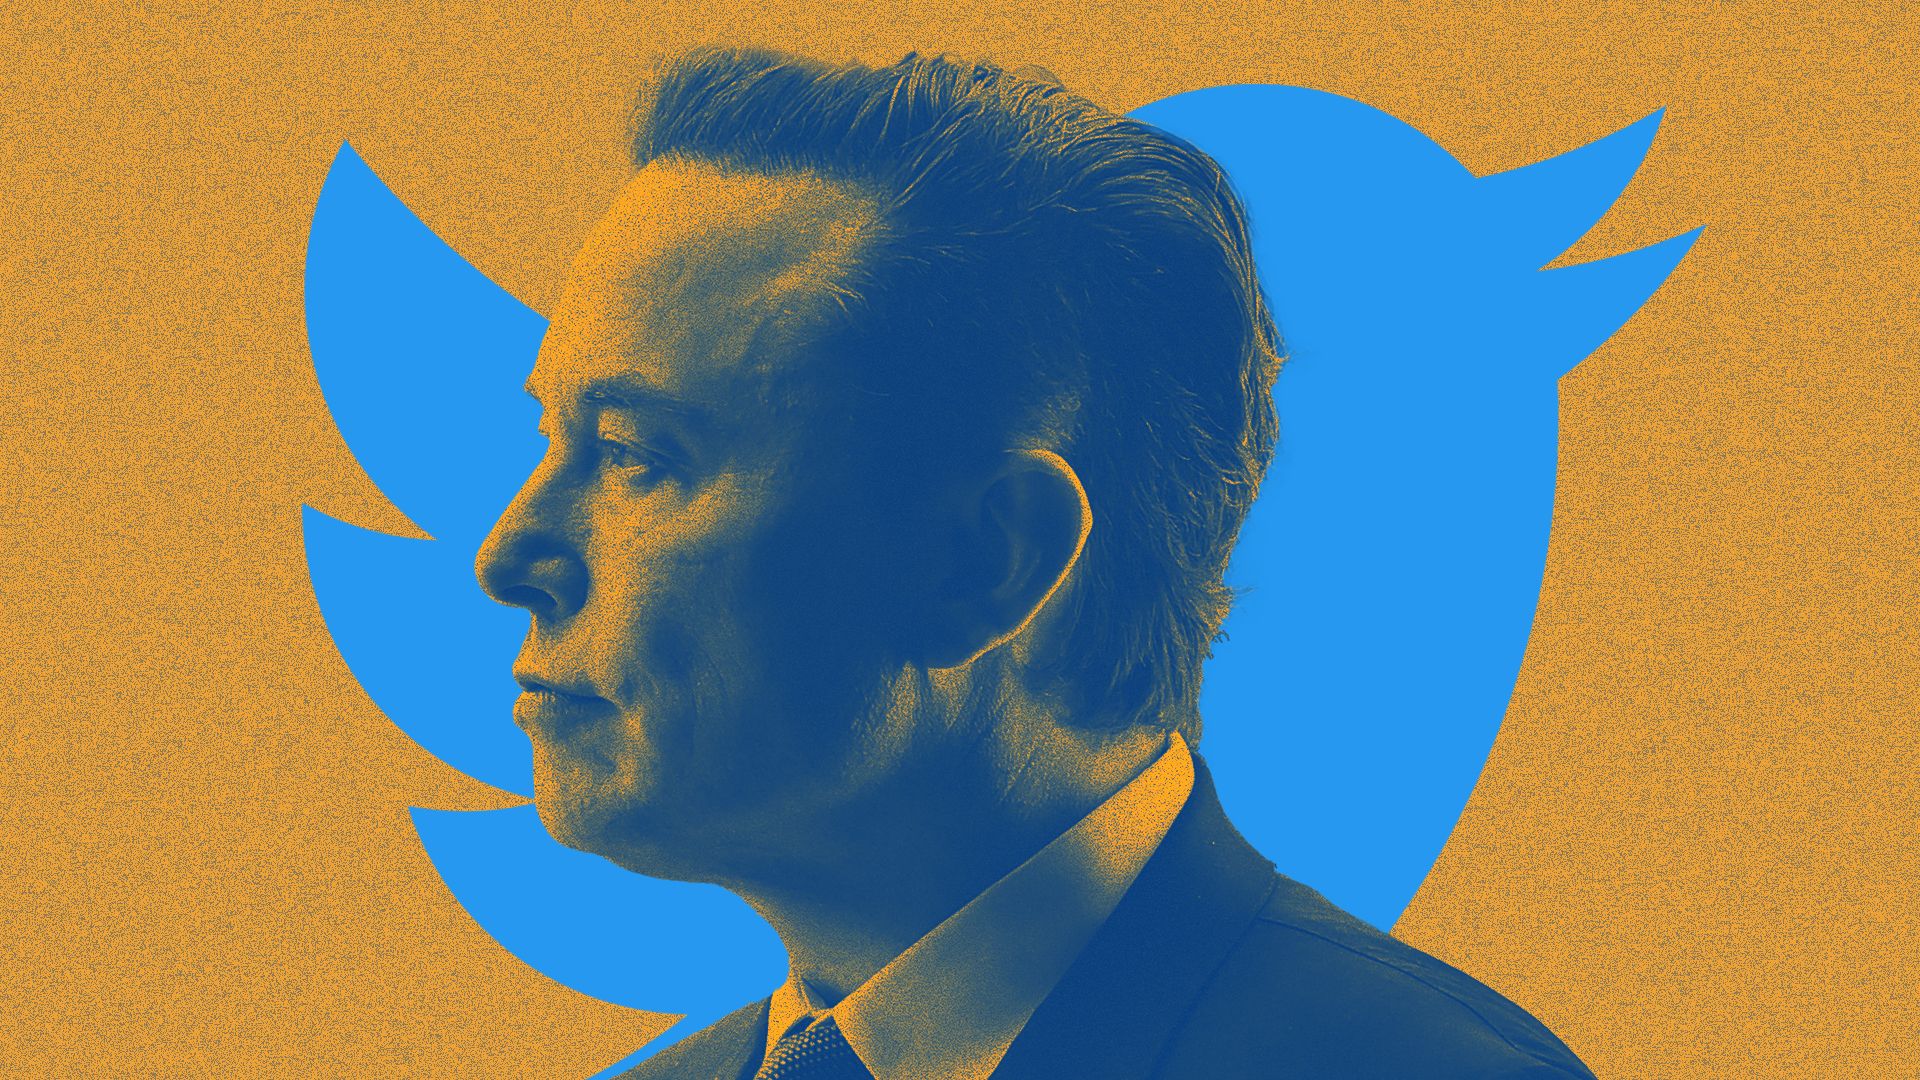 The cover image for season five of How It Happened shows a profile shot of Elon Musk and the blue Twitter bird icon.